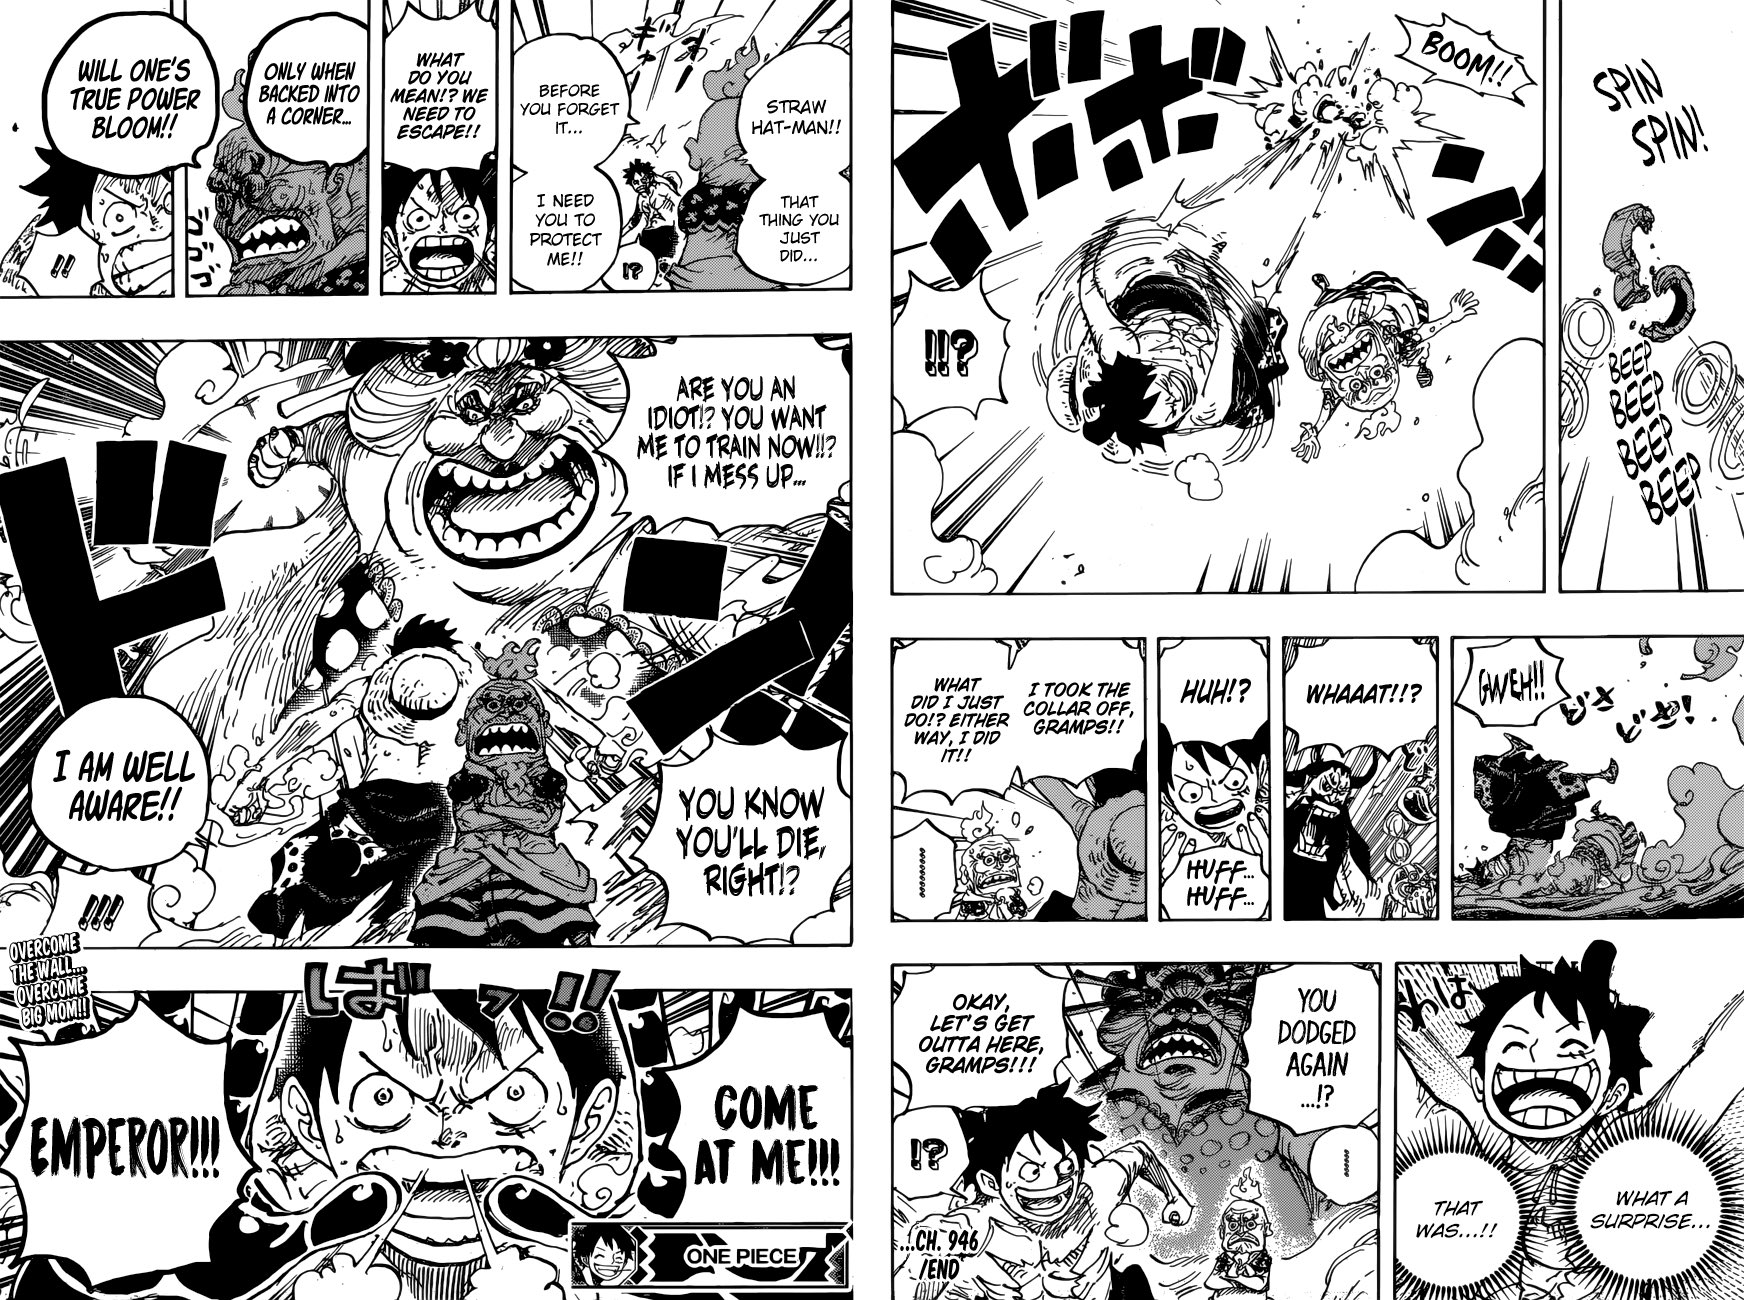 Vedu Al Twitter One Piece 946 Big Mom Vs Queen Queen Gets Two Shotted Big Mom Vs Luffy Luffy S Awakening Onepiece Onepiece946 T Co Df40errtec Twitter